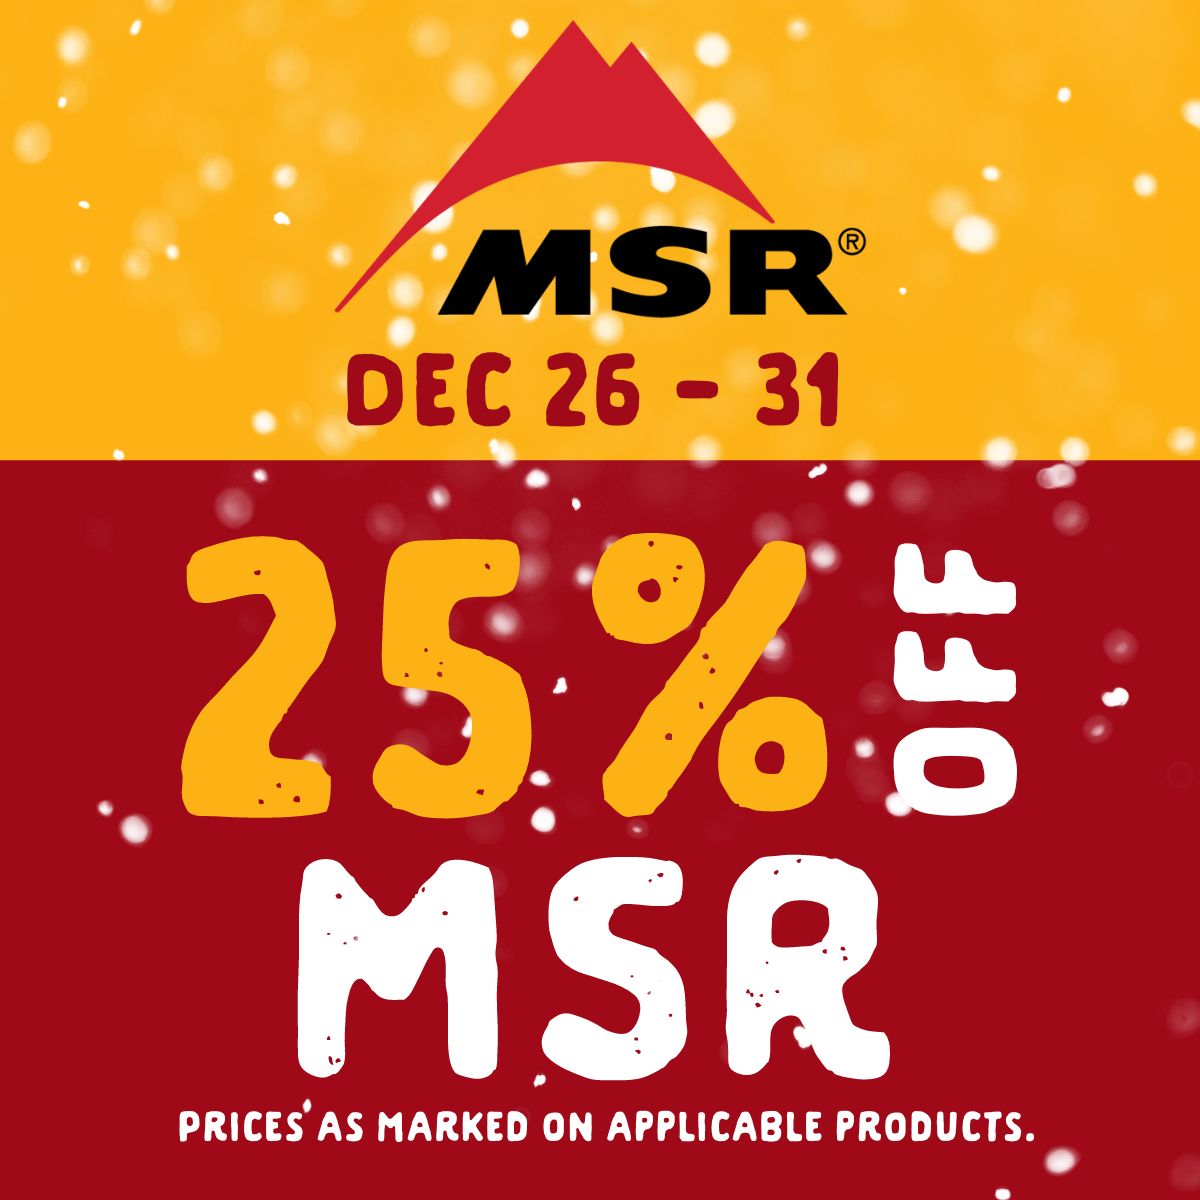 25% off MSR from December 26 to 31. Prices as marked on applicable products.